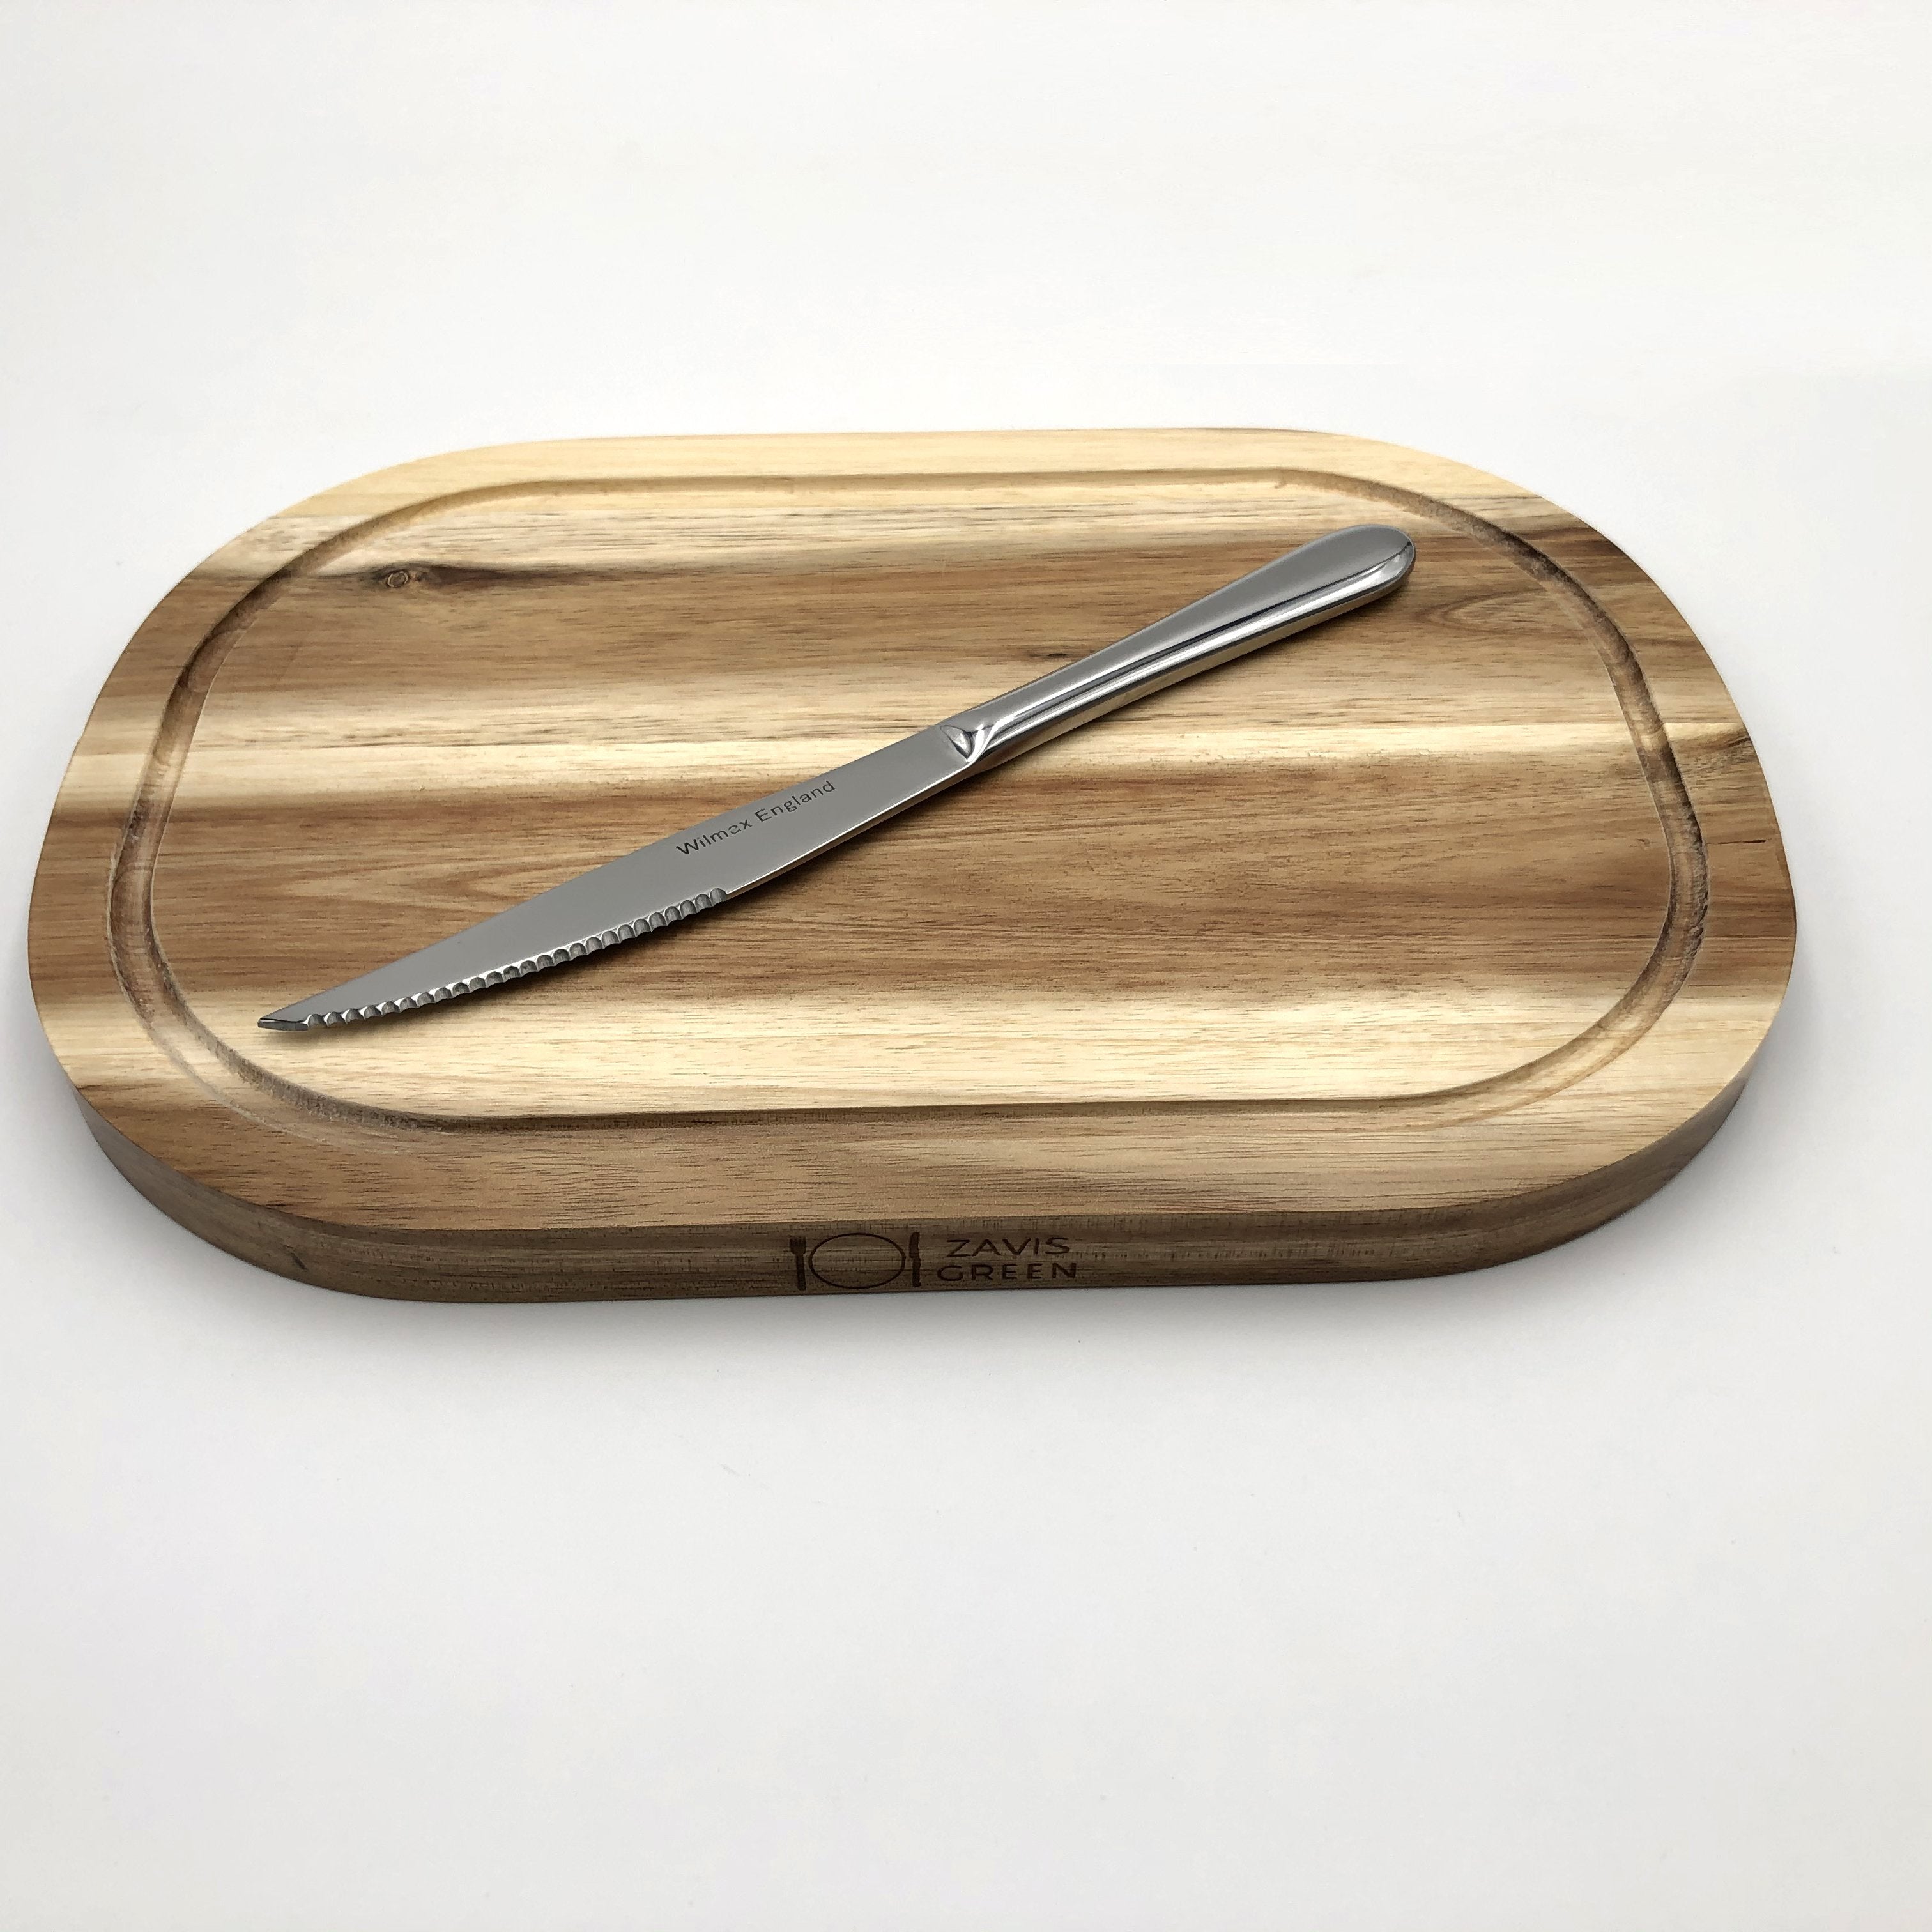 Acacia Steak Board and Stainless Steak Knife Serving Set